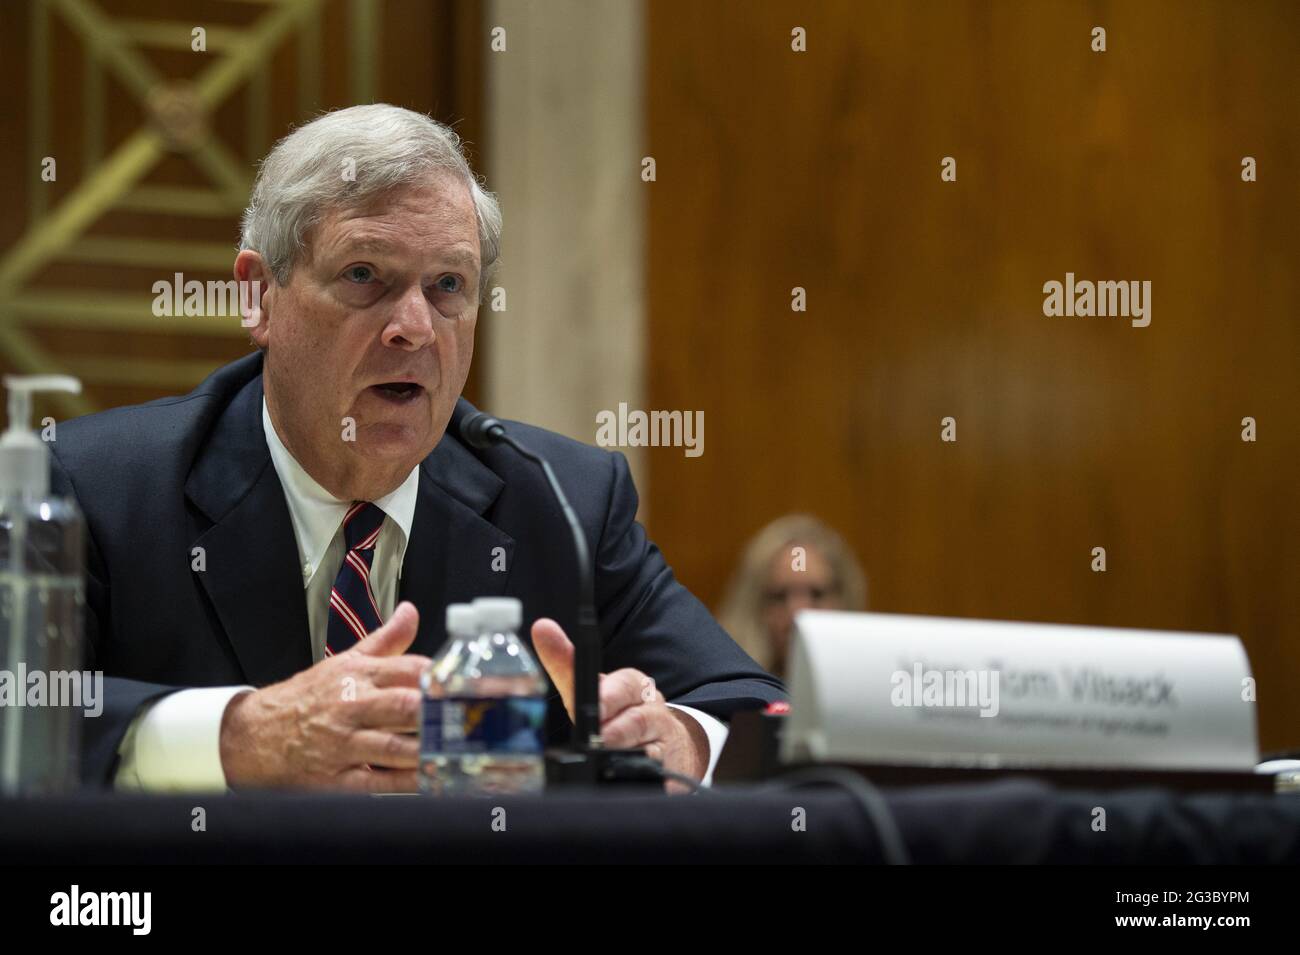 Secretary of the U.S. Department of Agriculture Tom Vilsack .speaks during a Senate Subcommittee hearing on the Department of Agriculture's proposed budget estimates for fiscal year 2022 in Washington, DC., on Wednesday, June 10, 2021.      Photo by Bonnie Cash/UPI. Stock Photo